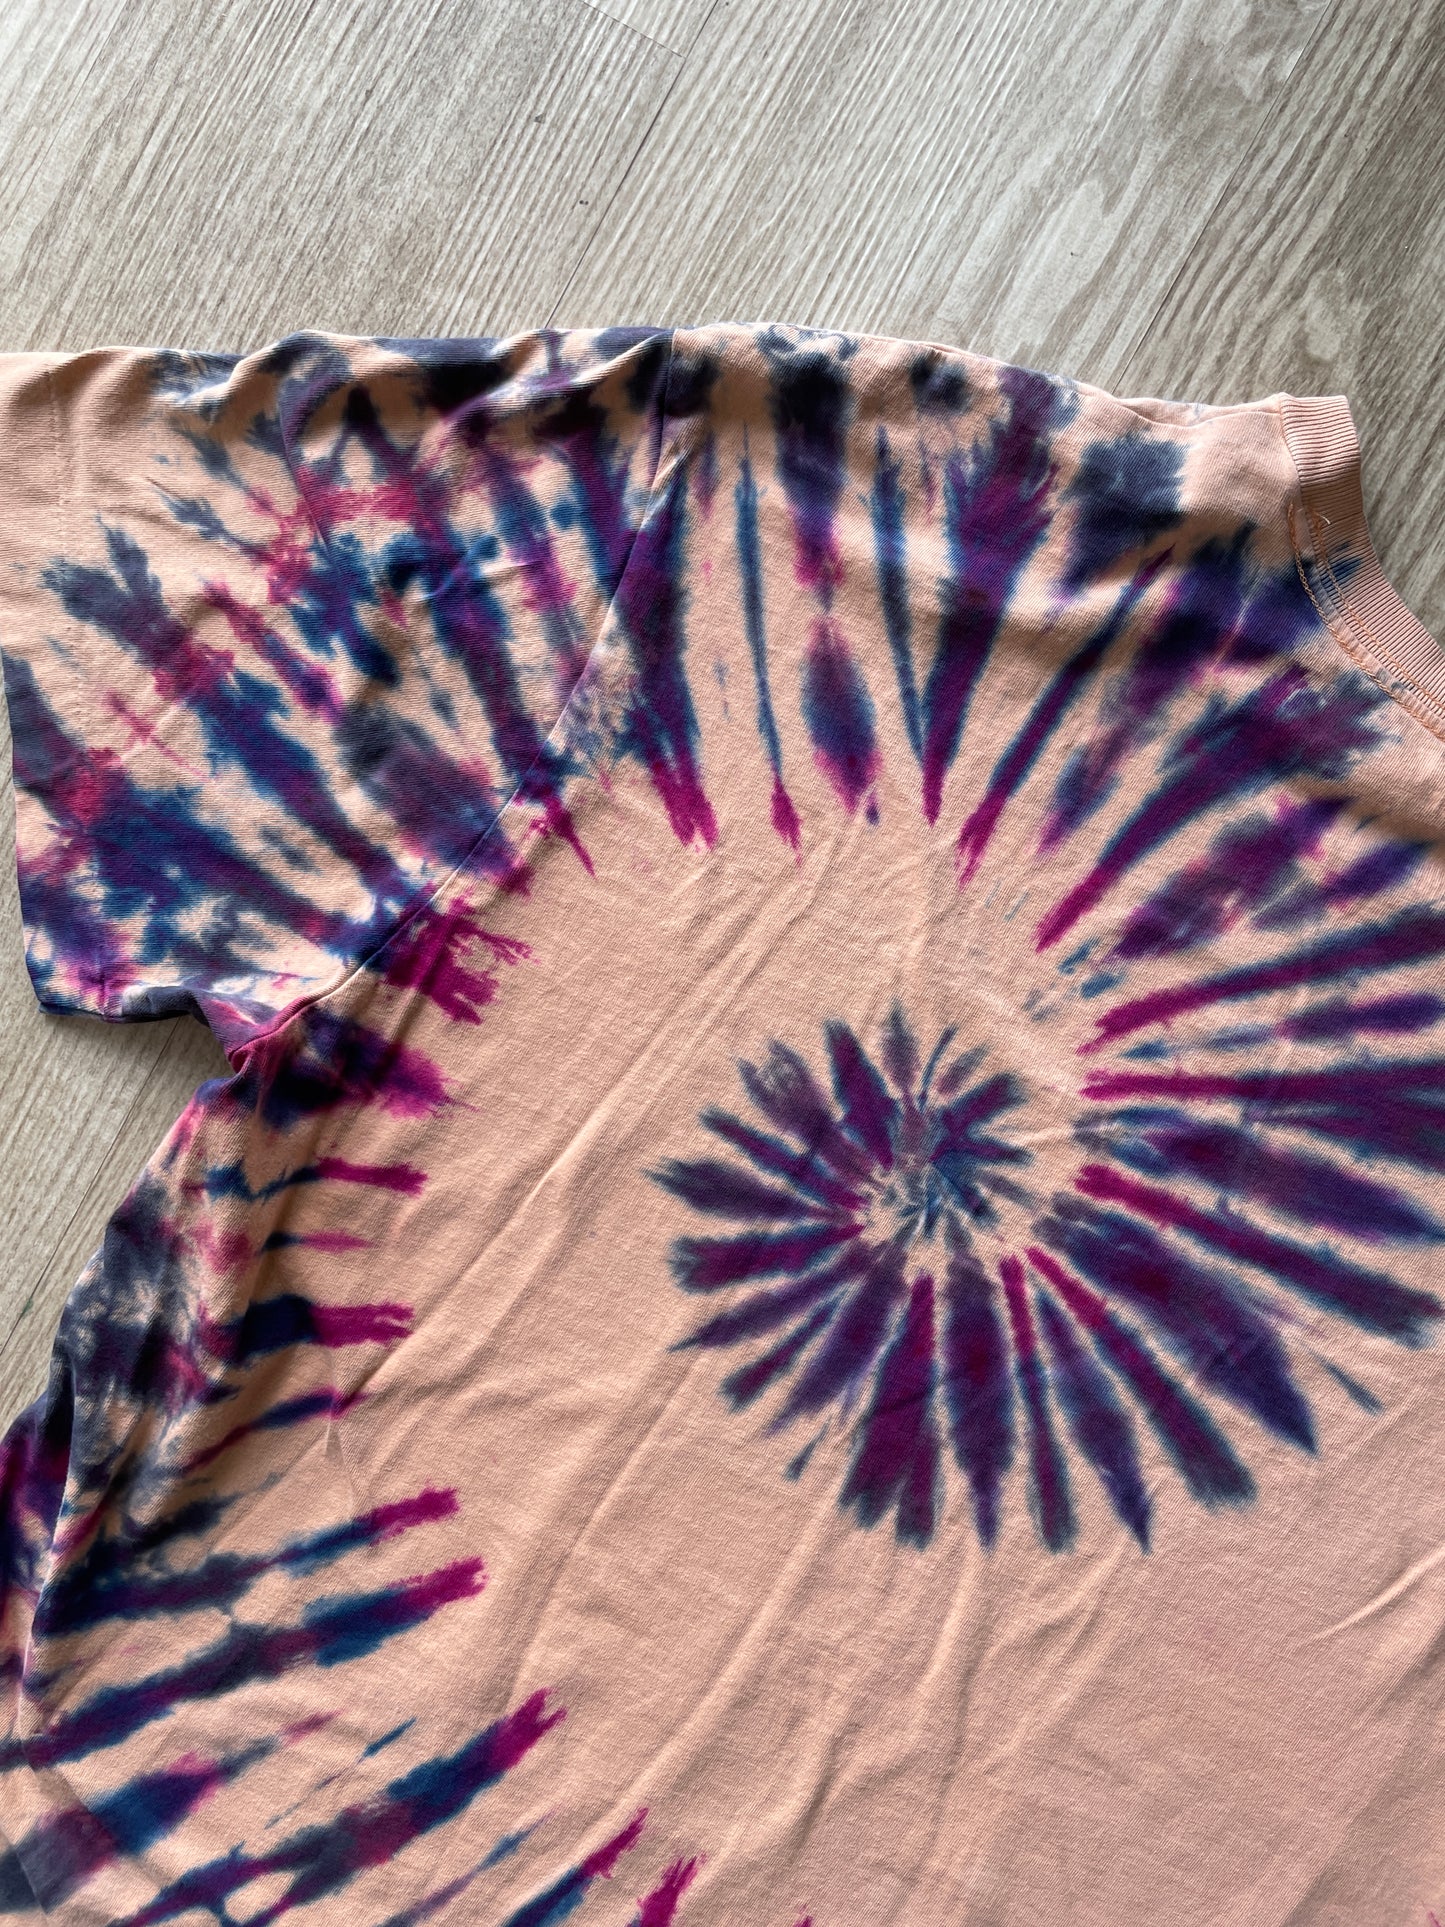 LARGE Men's Prickly Pear Cactus Tie Dye T-Shirt | One-Of-a-Kind Pink and Purple Spiral Short Sleeve